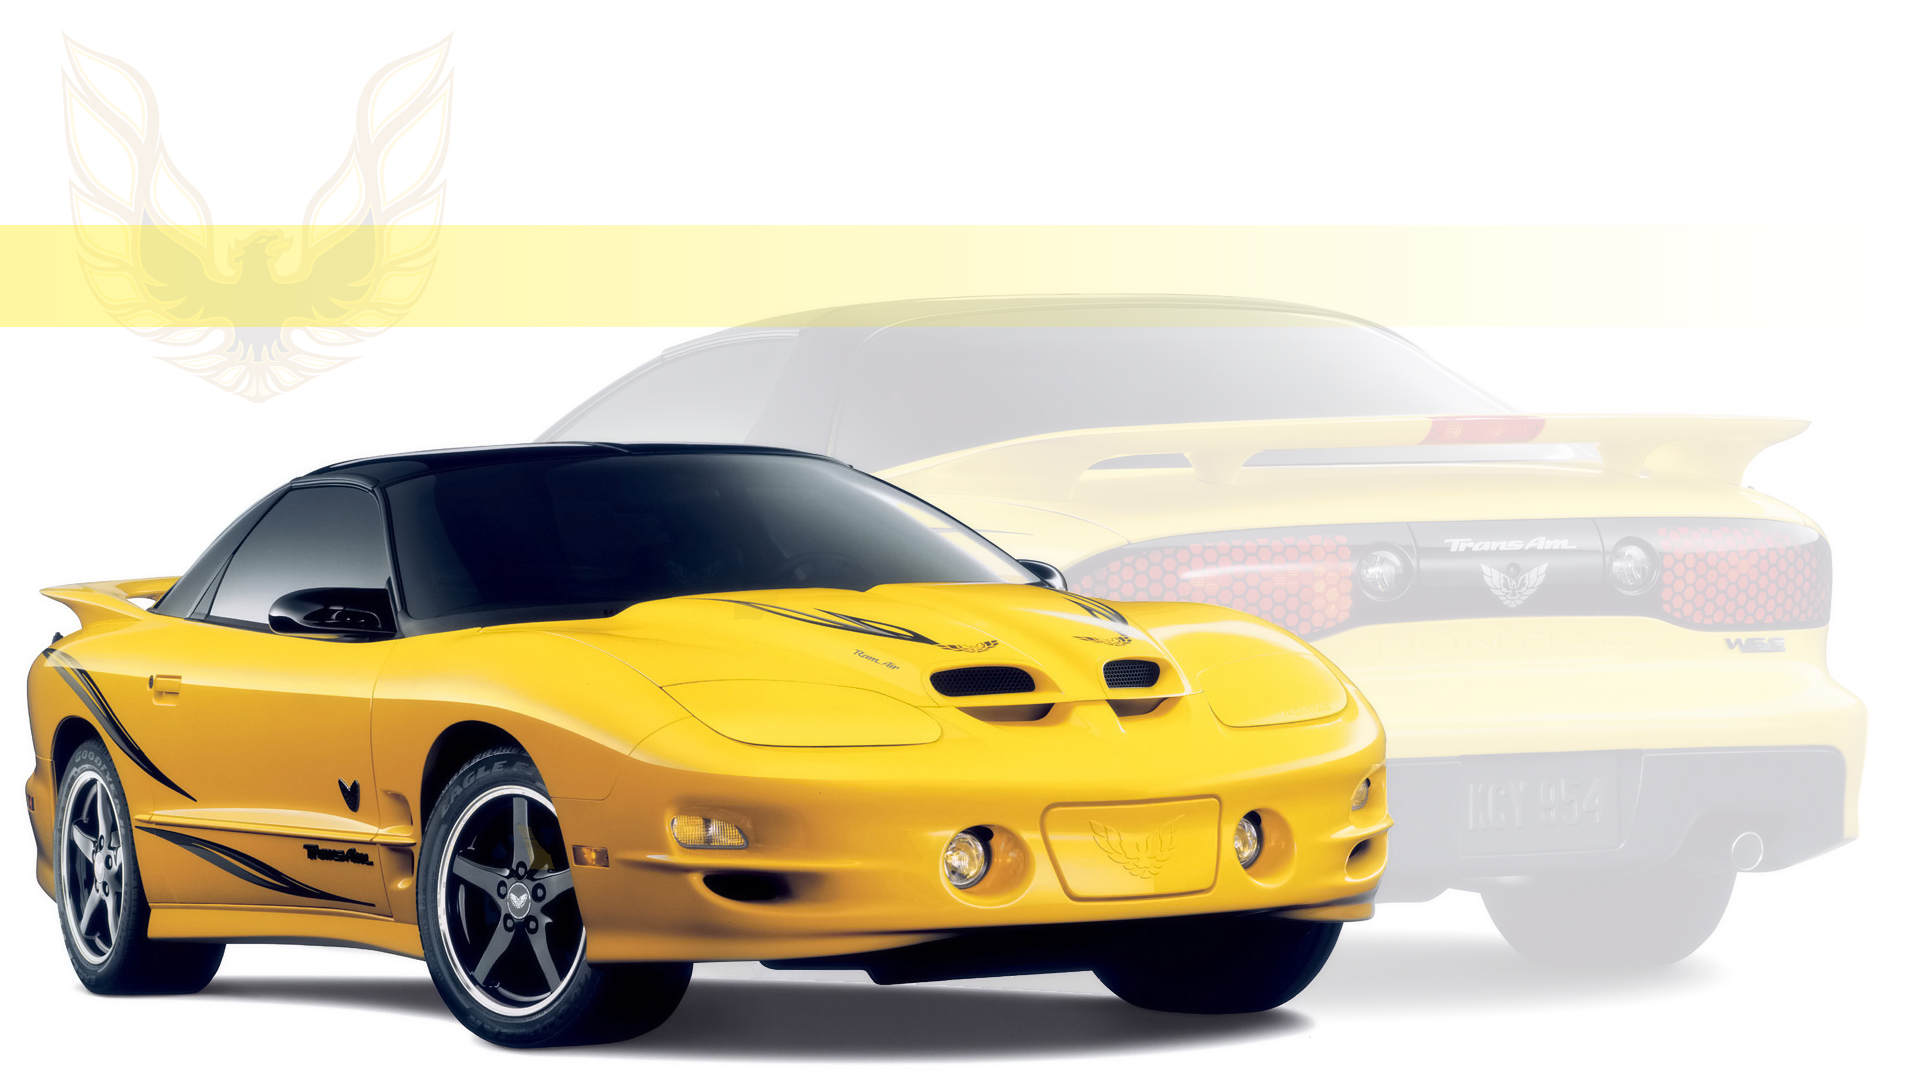 Wallpapers, car, animated, cars, category (# - ClipArt Best - ClipArt Best